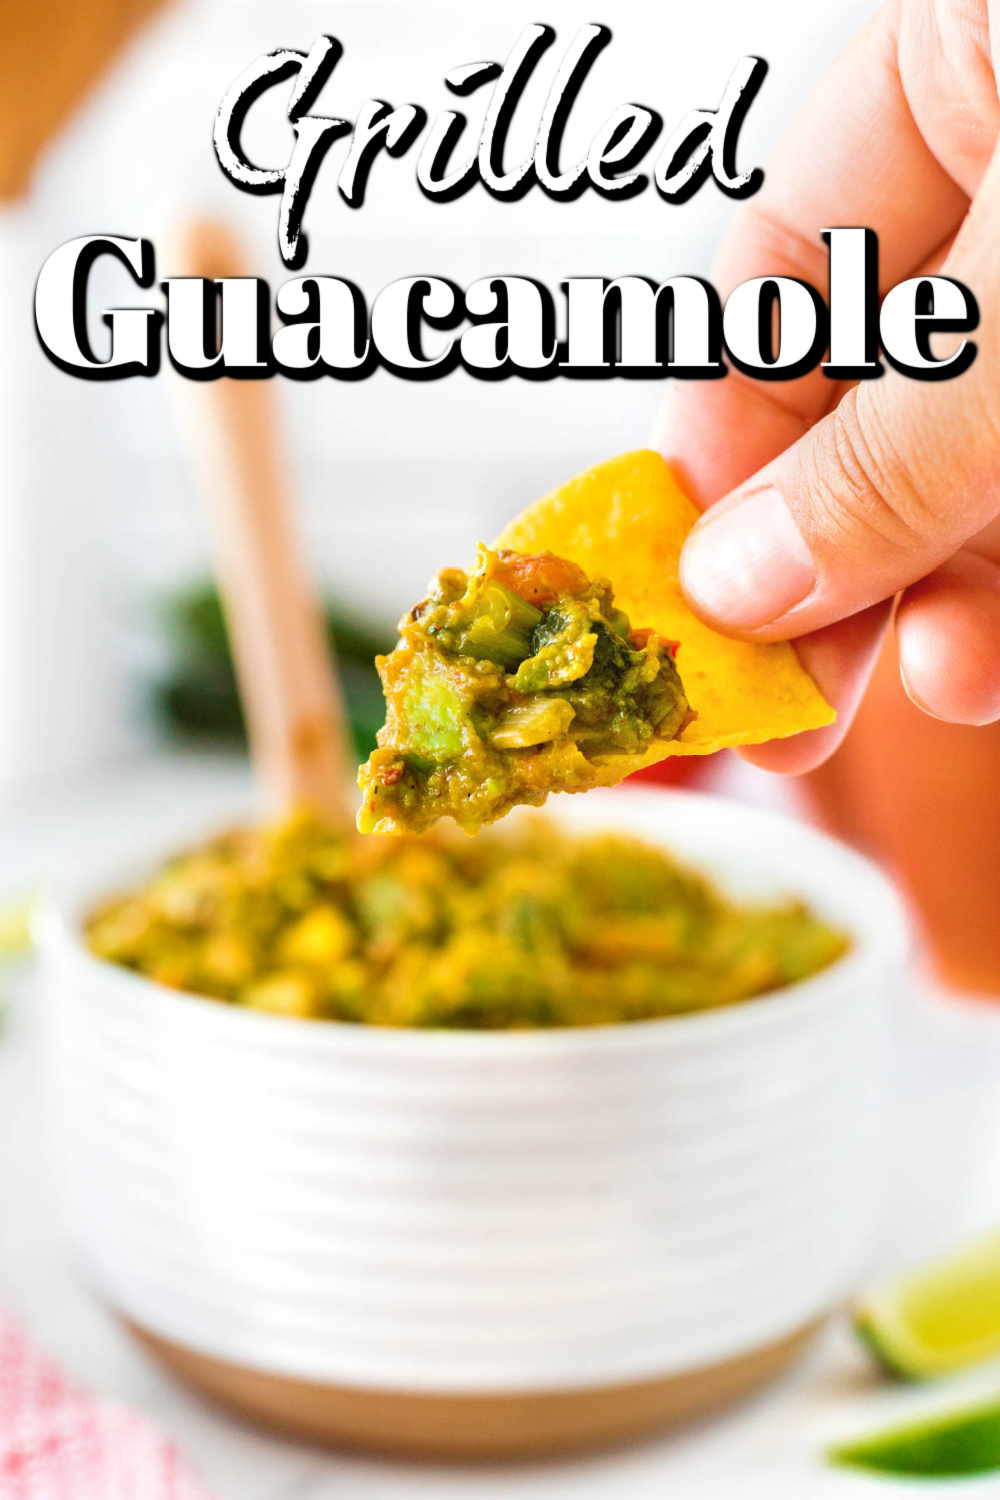 When you serve this easy-to-make grilled guacamole, everyone is going to be looking for more. You may want to make a double batch!